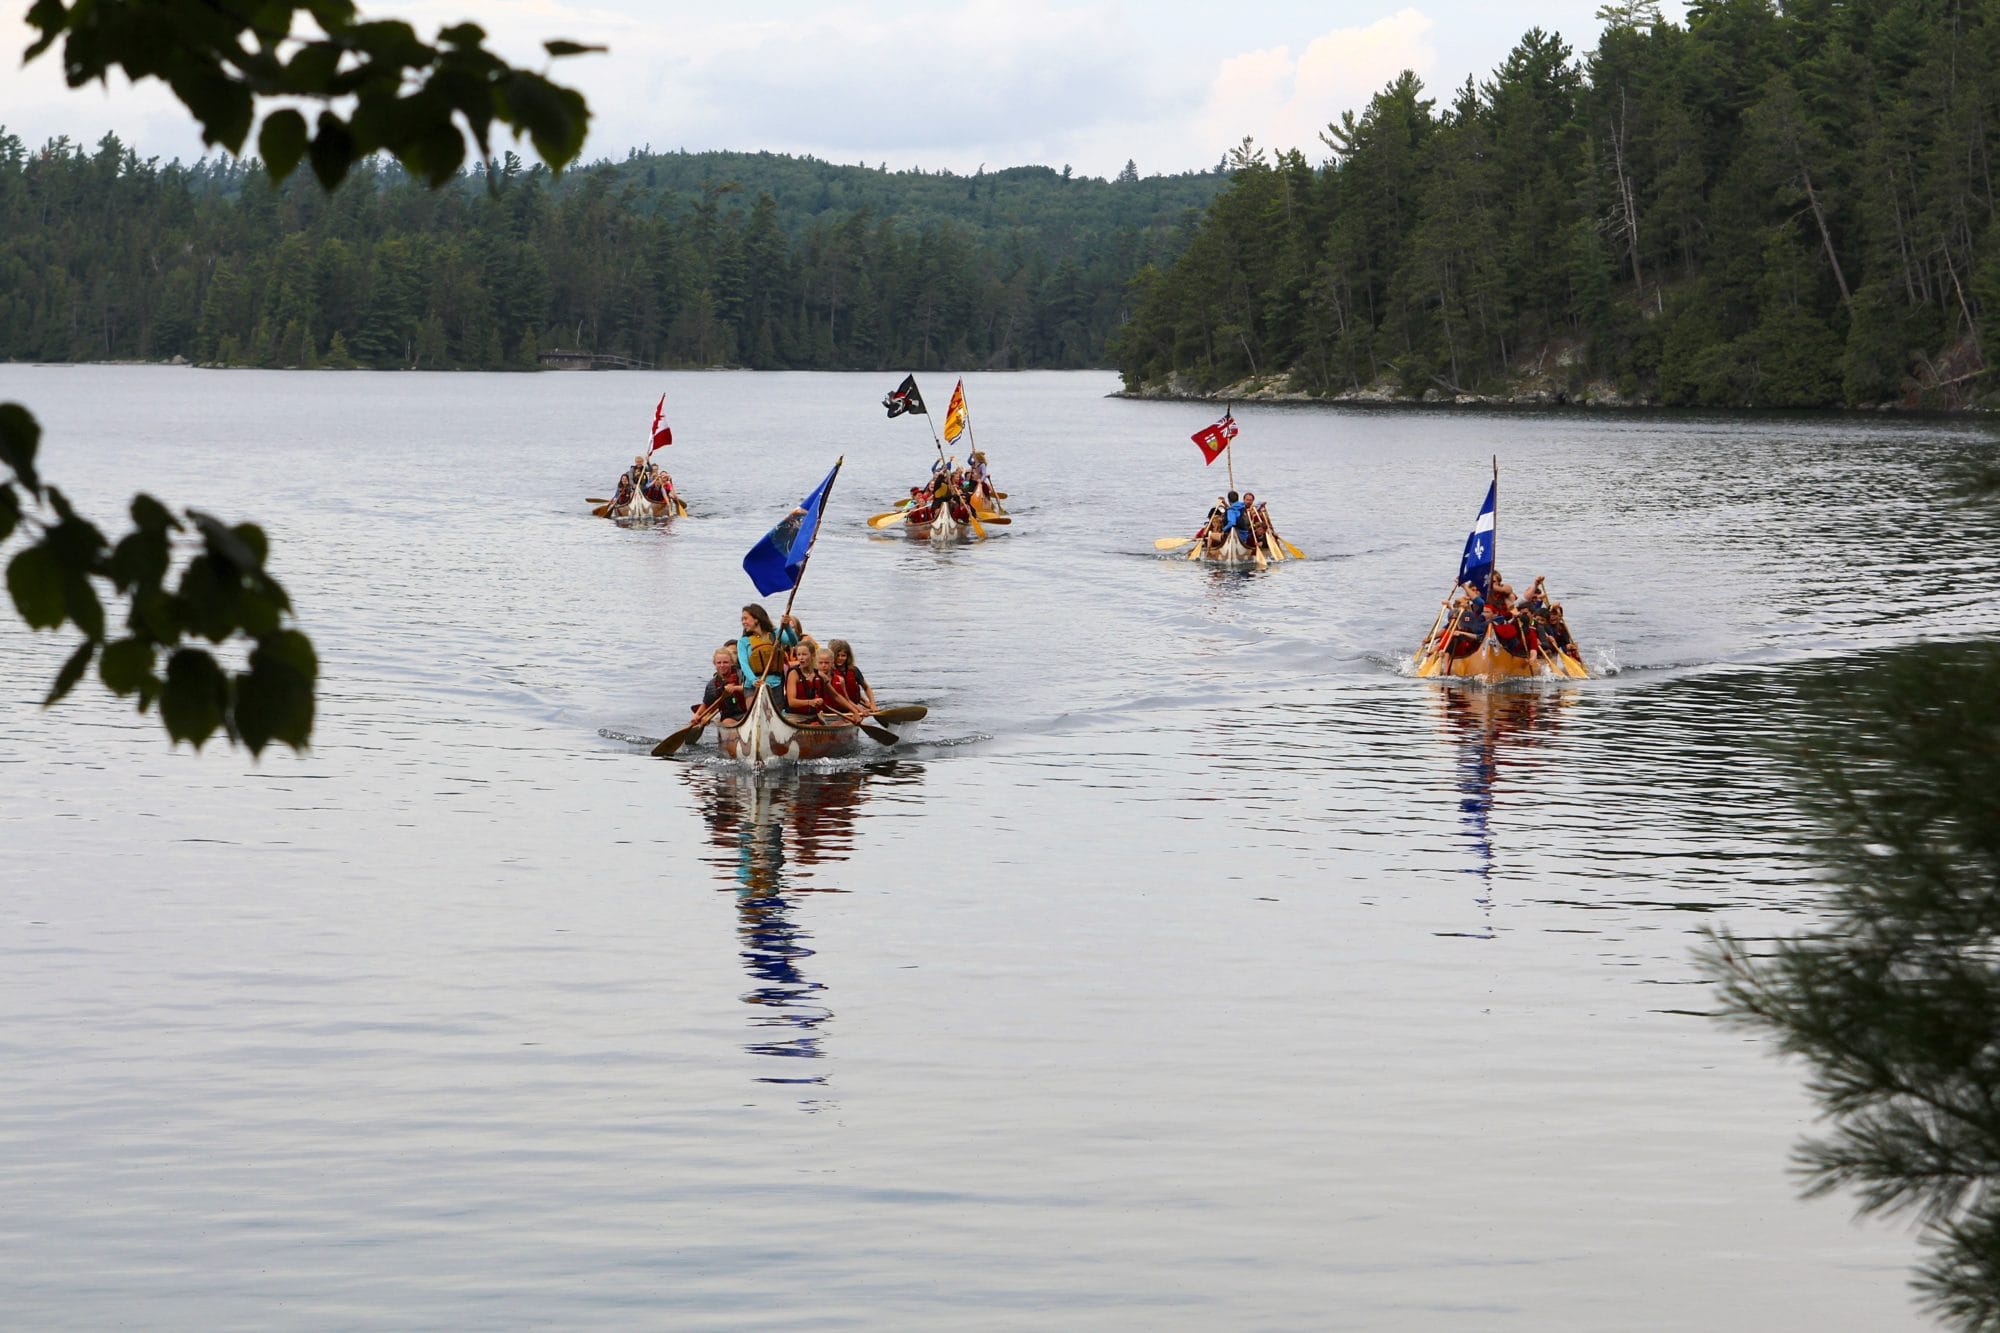 Canoe groups returning home on the water